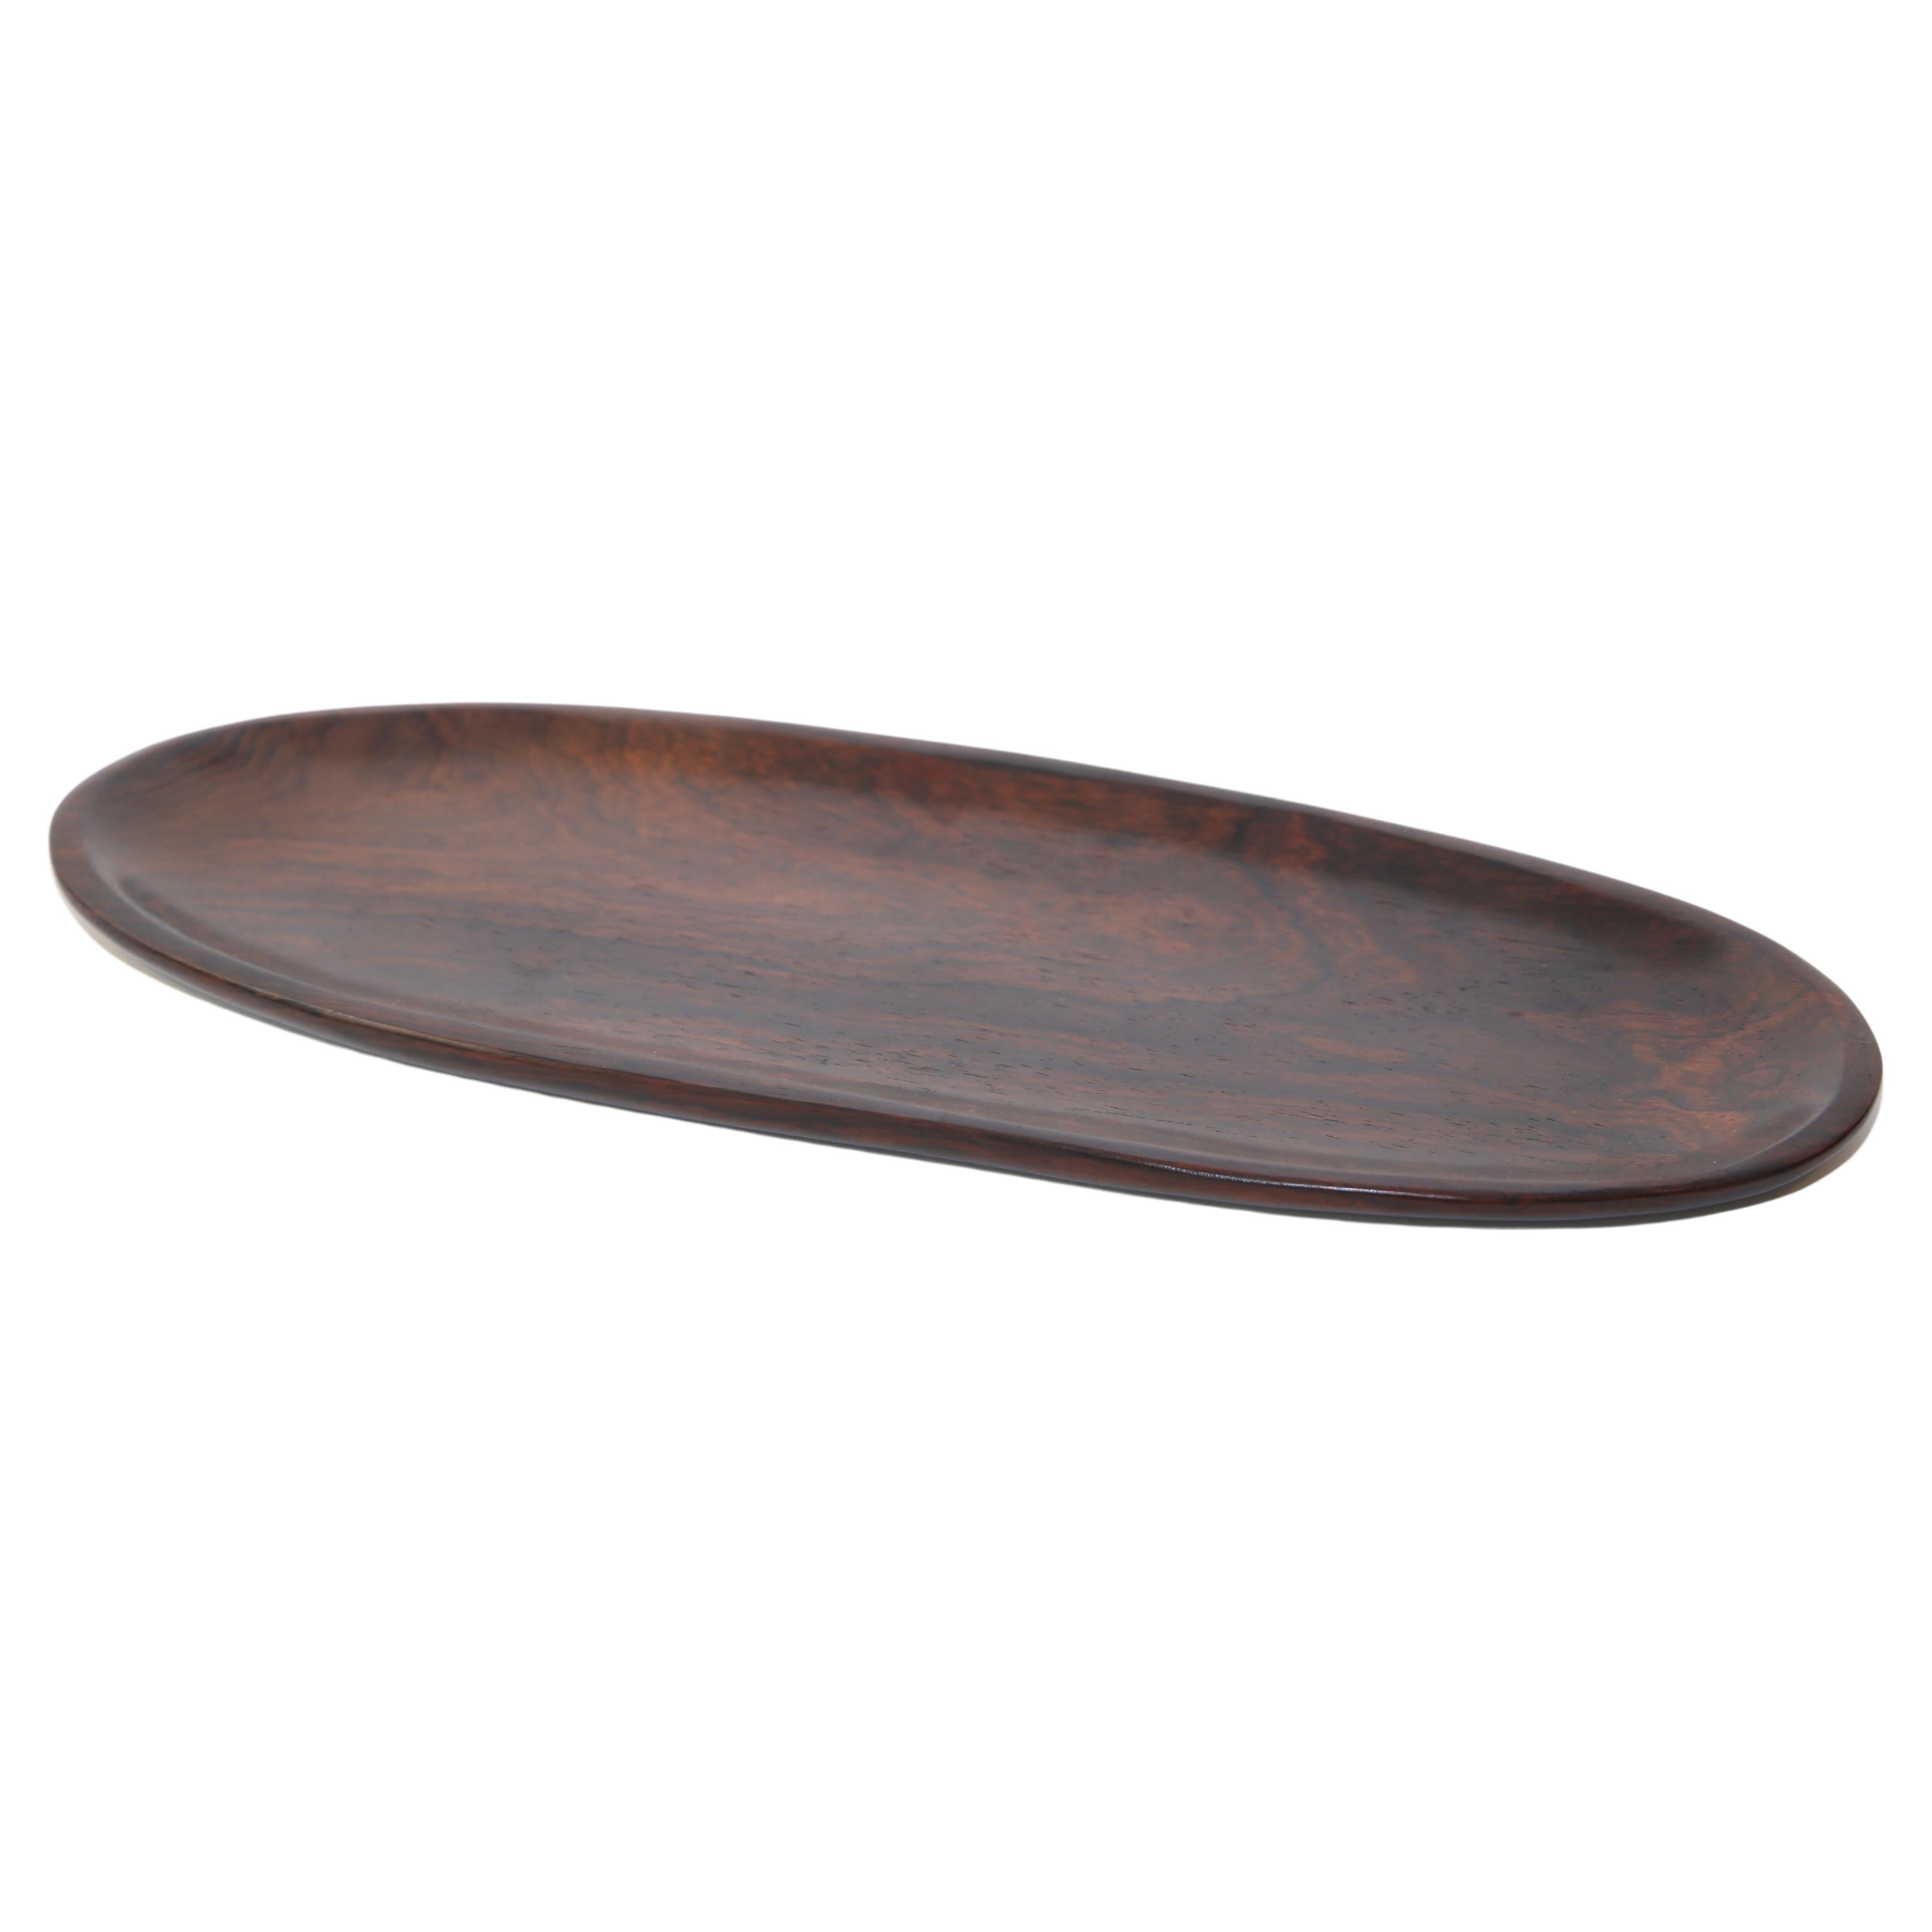 Odile Noll's rosewood plate from the '50s For Sale